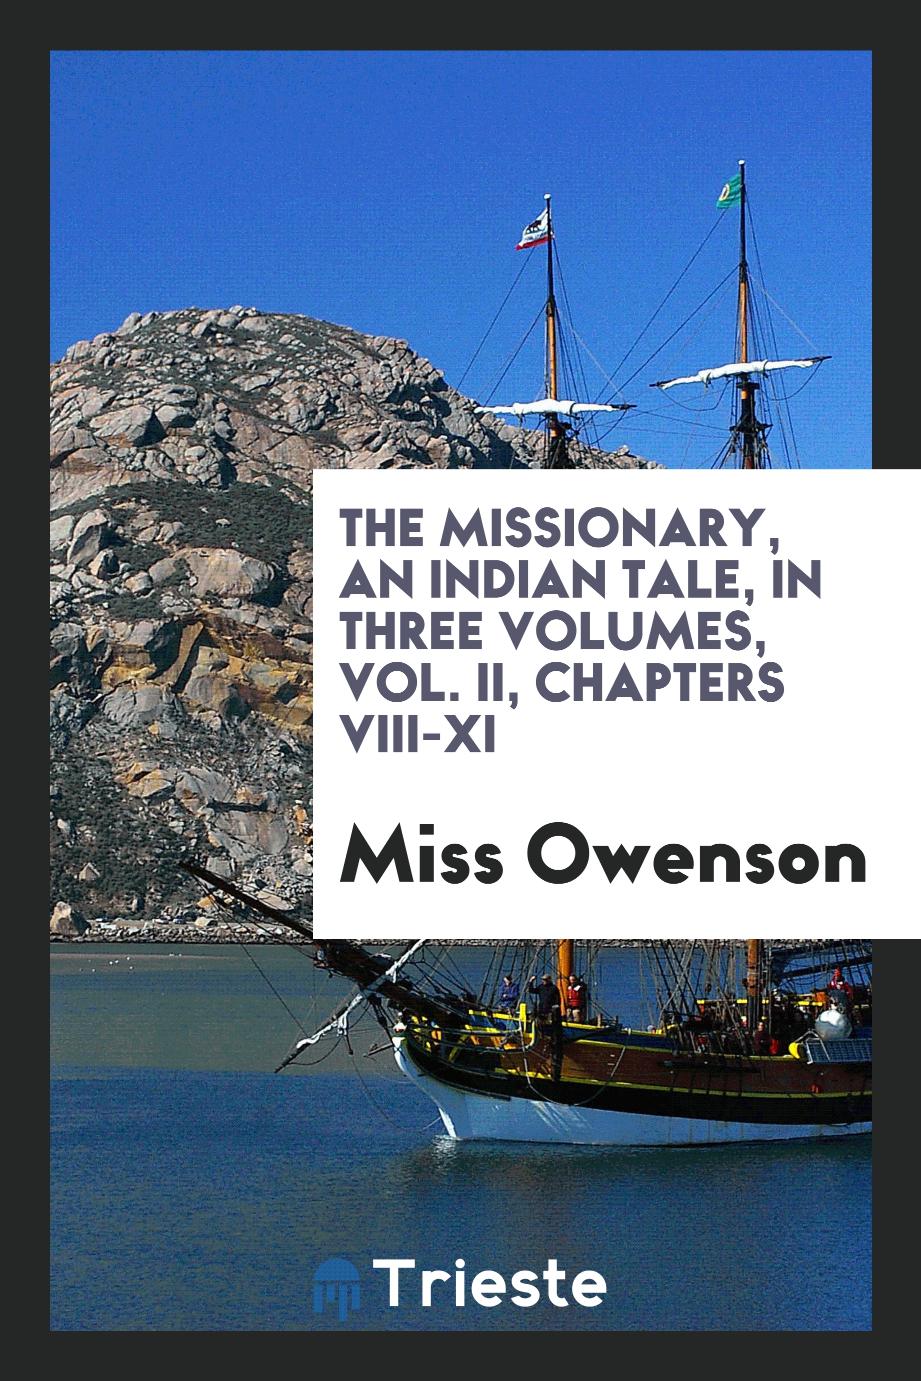 The missionary, an Indian tale, in three volumes, Vol. II, Chapters VIII-XI